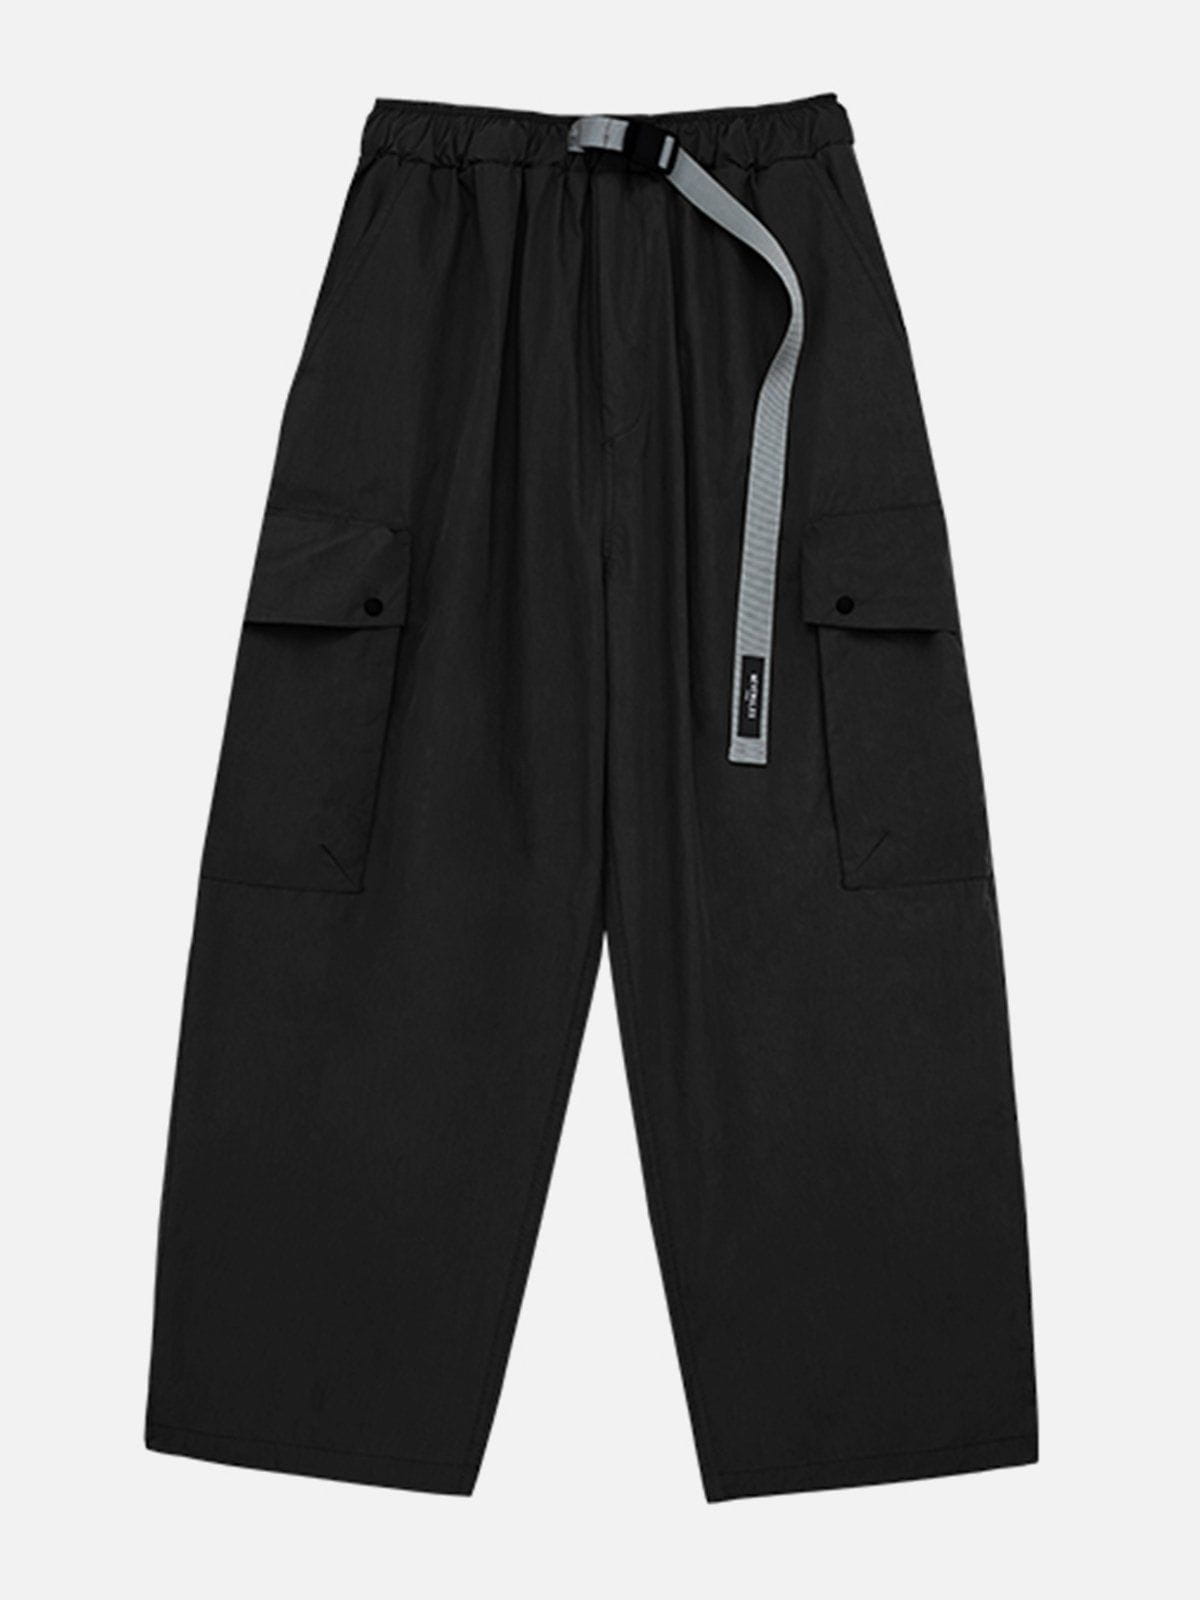 Sneakerland® - Solid Color Functional Cargo Pants